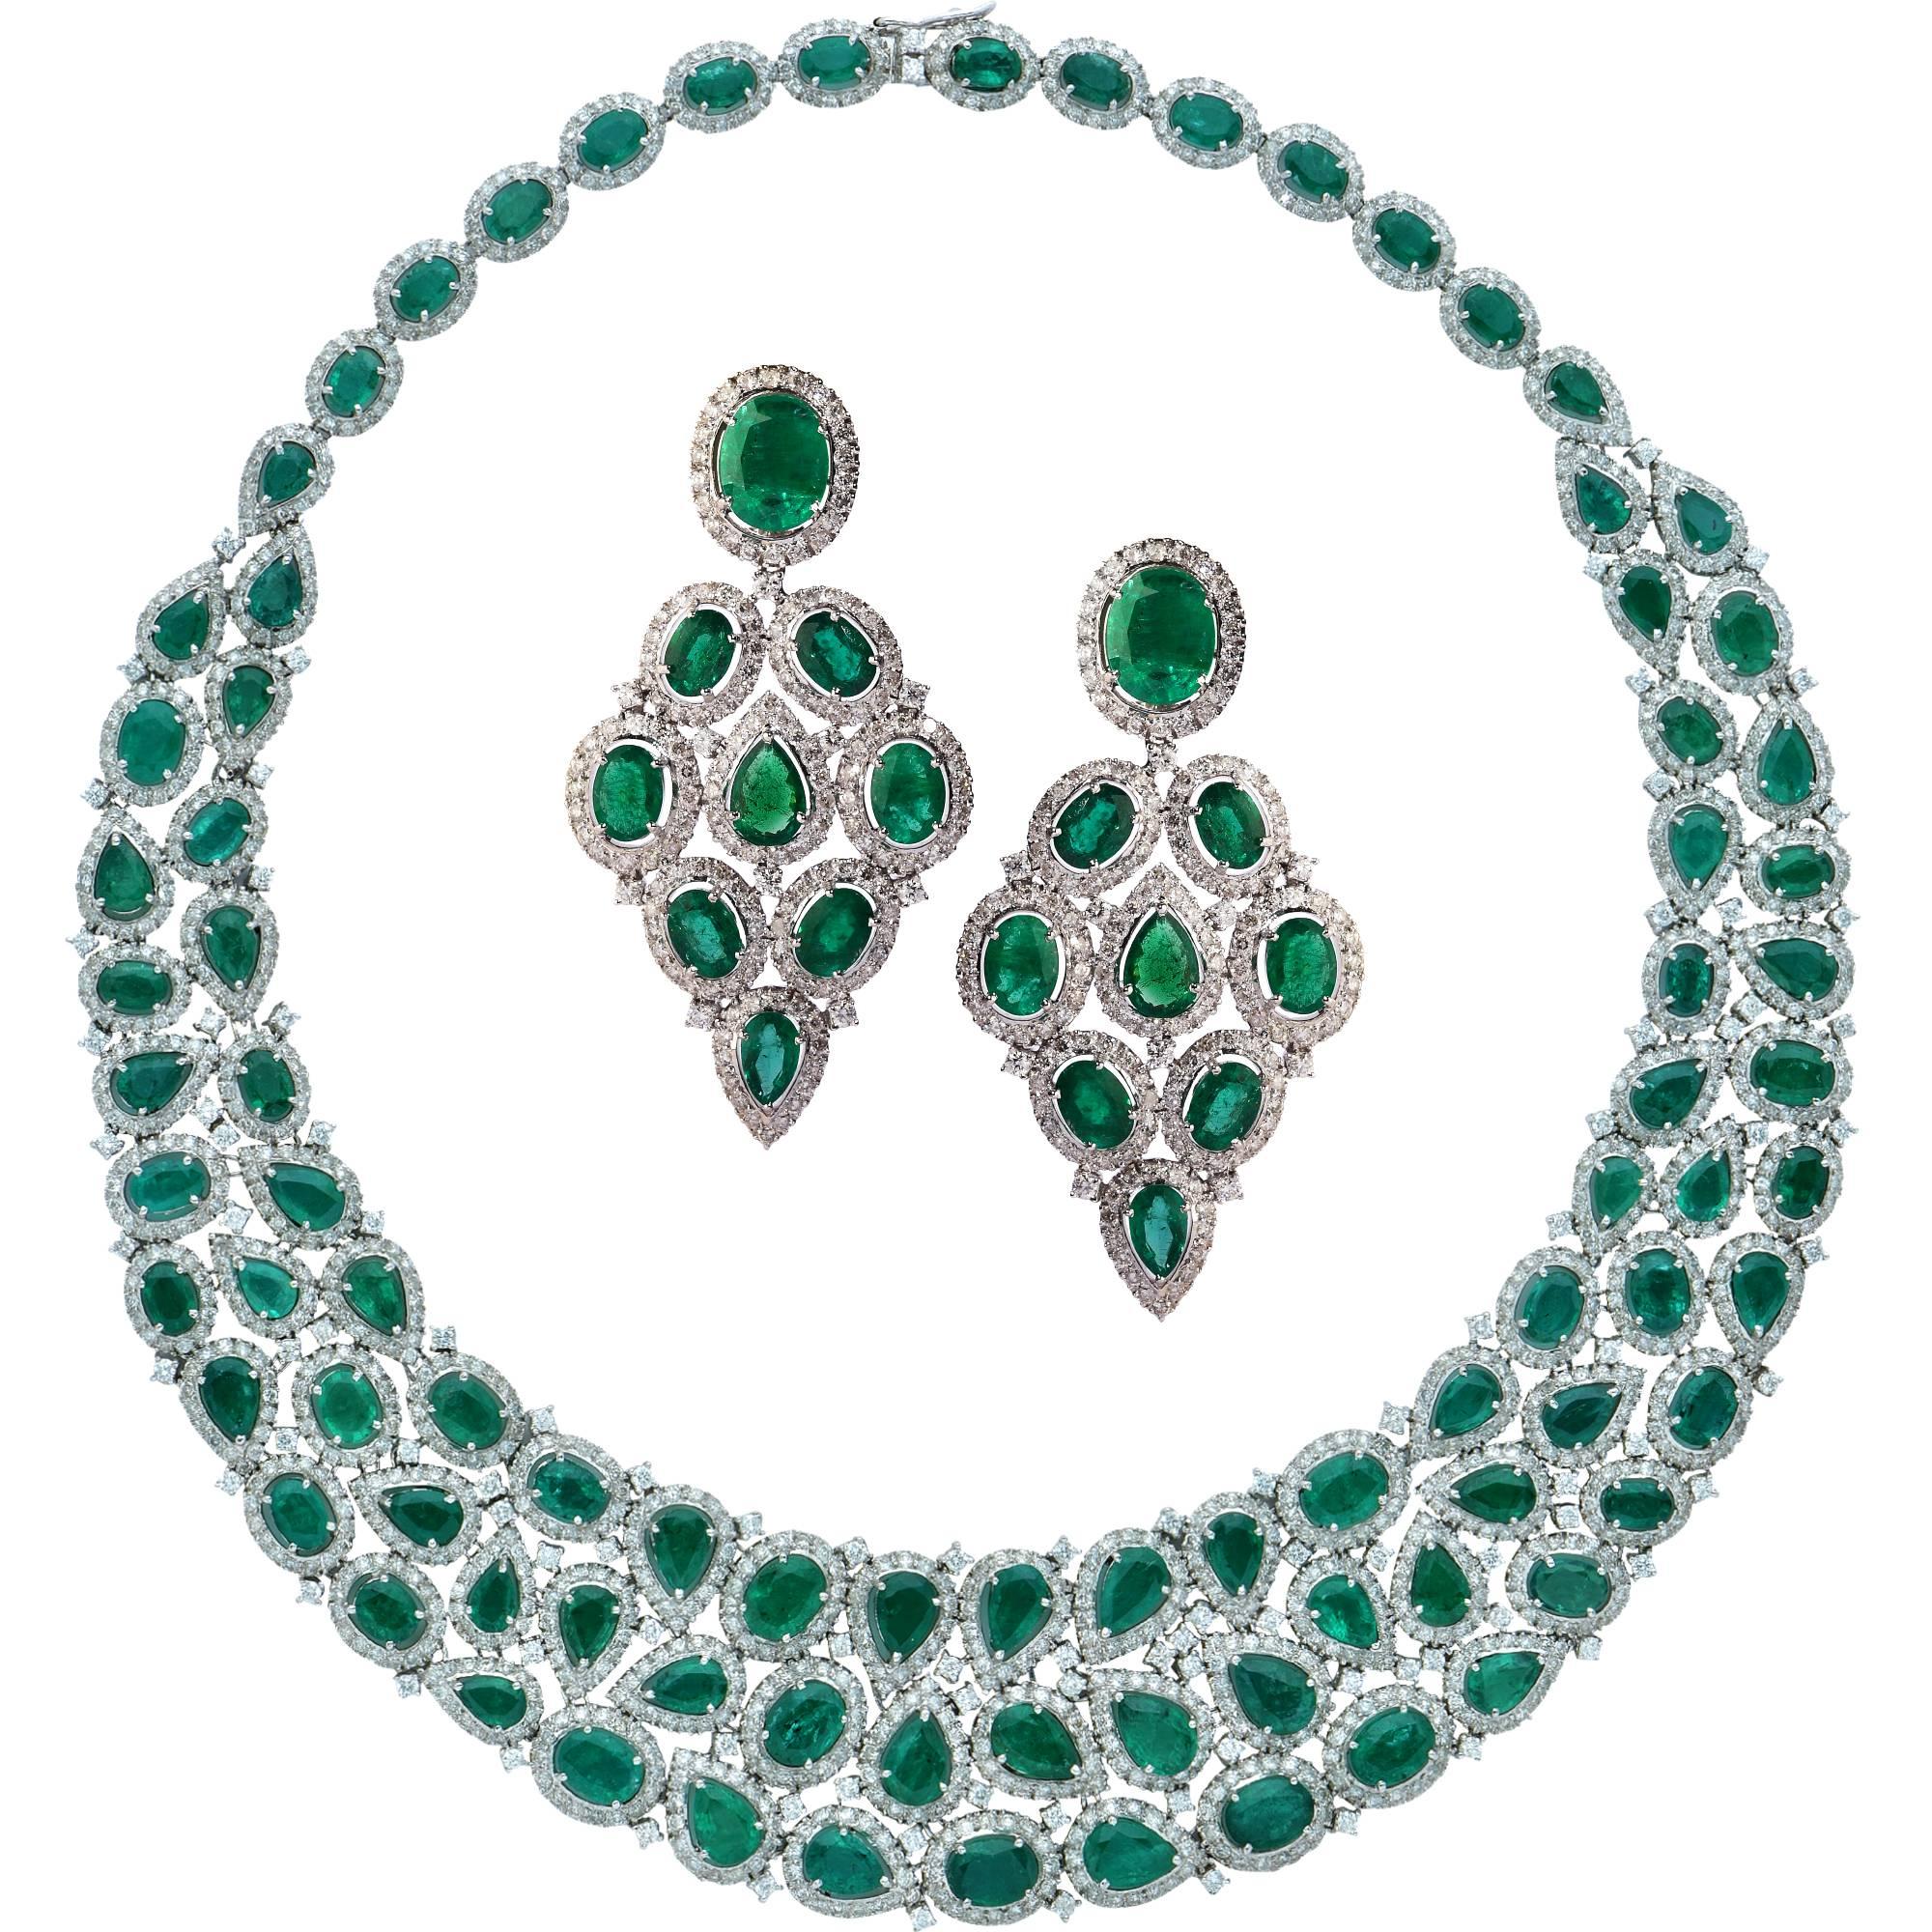 101 Carat Emerald and Diamond Necklace and Earrings Set